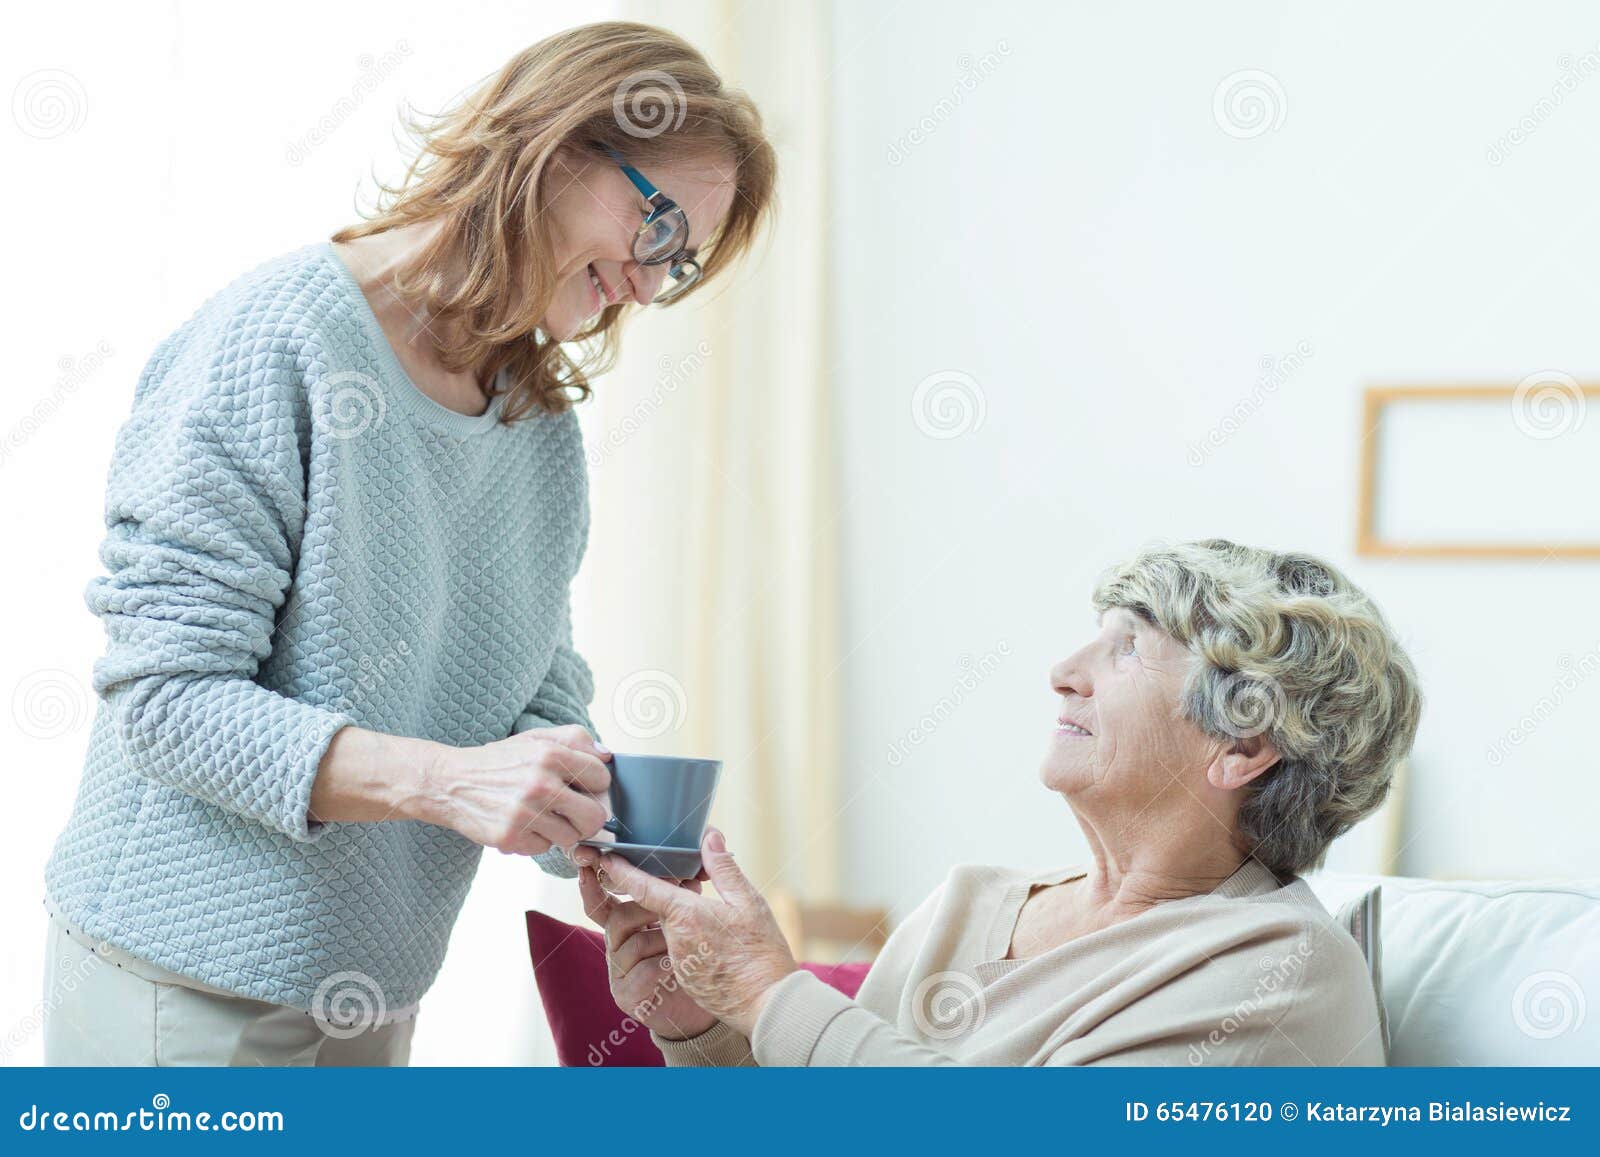 care assistant helping elderly lady